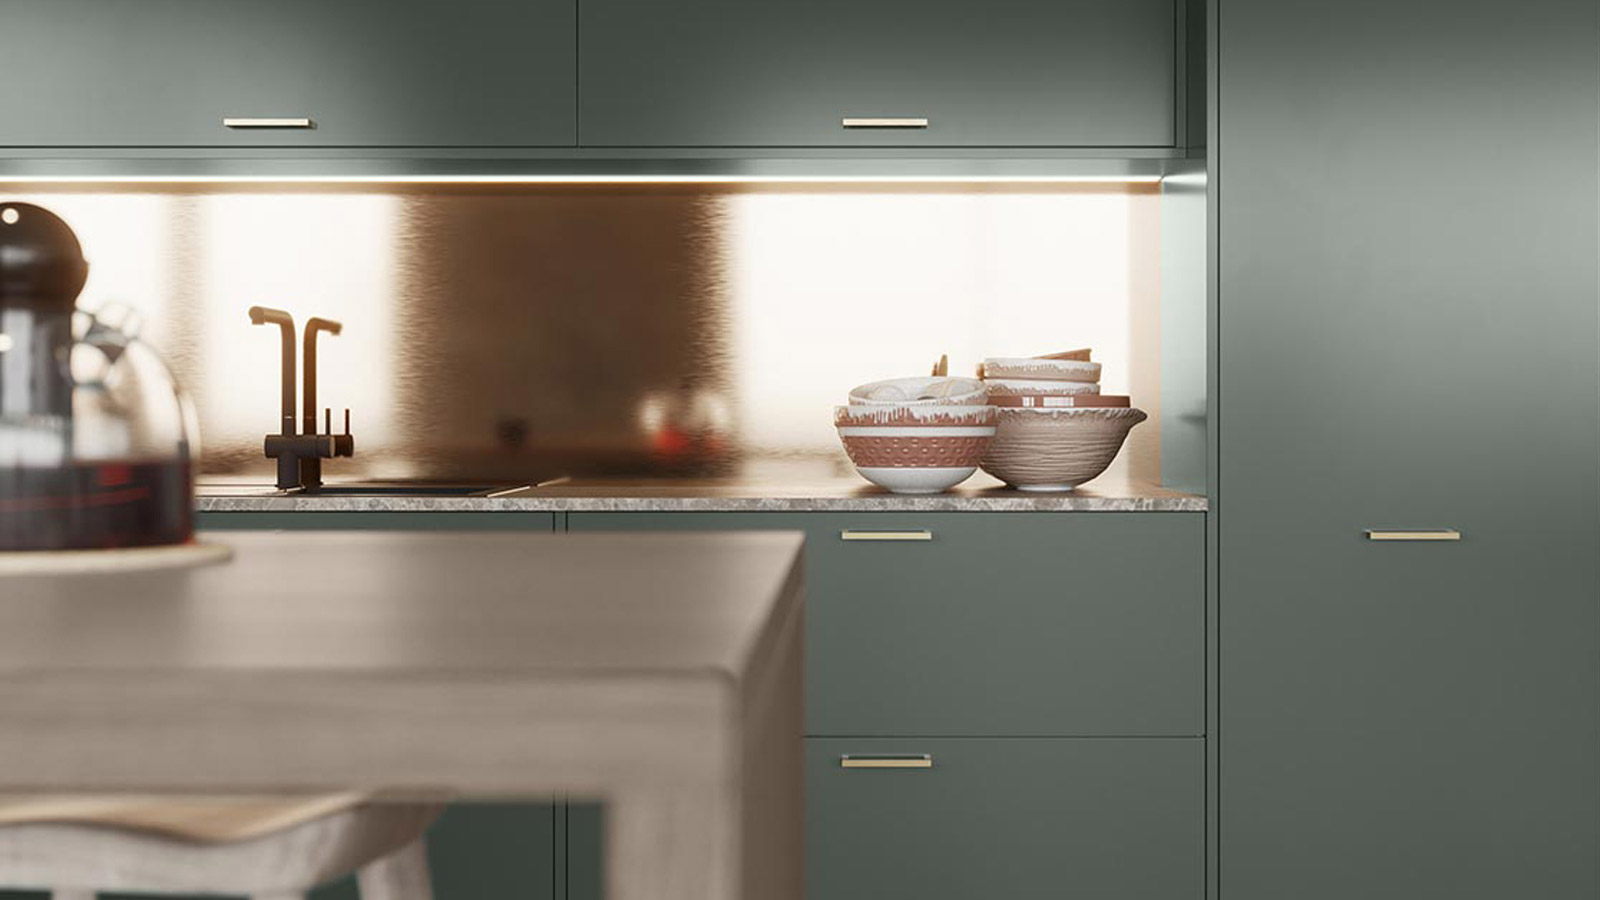 Glossy green kitchen cabinets with brass t-bar handles and a metallic backsplash